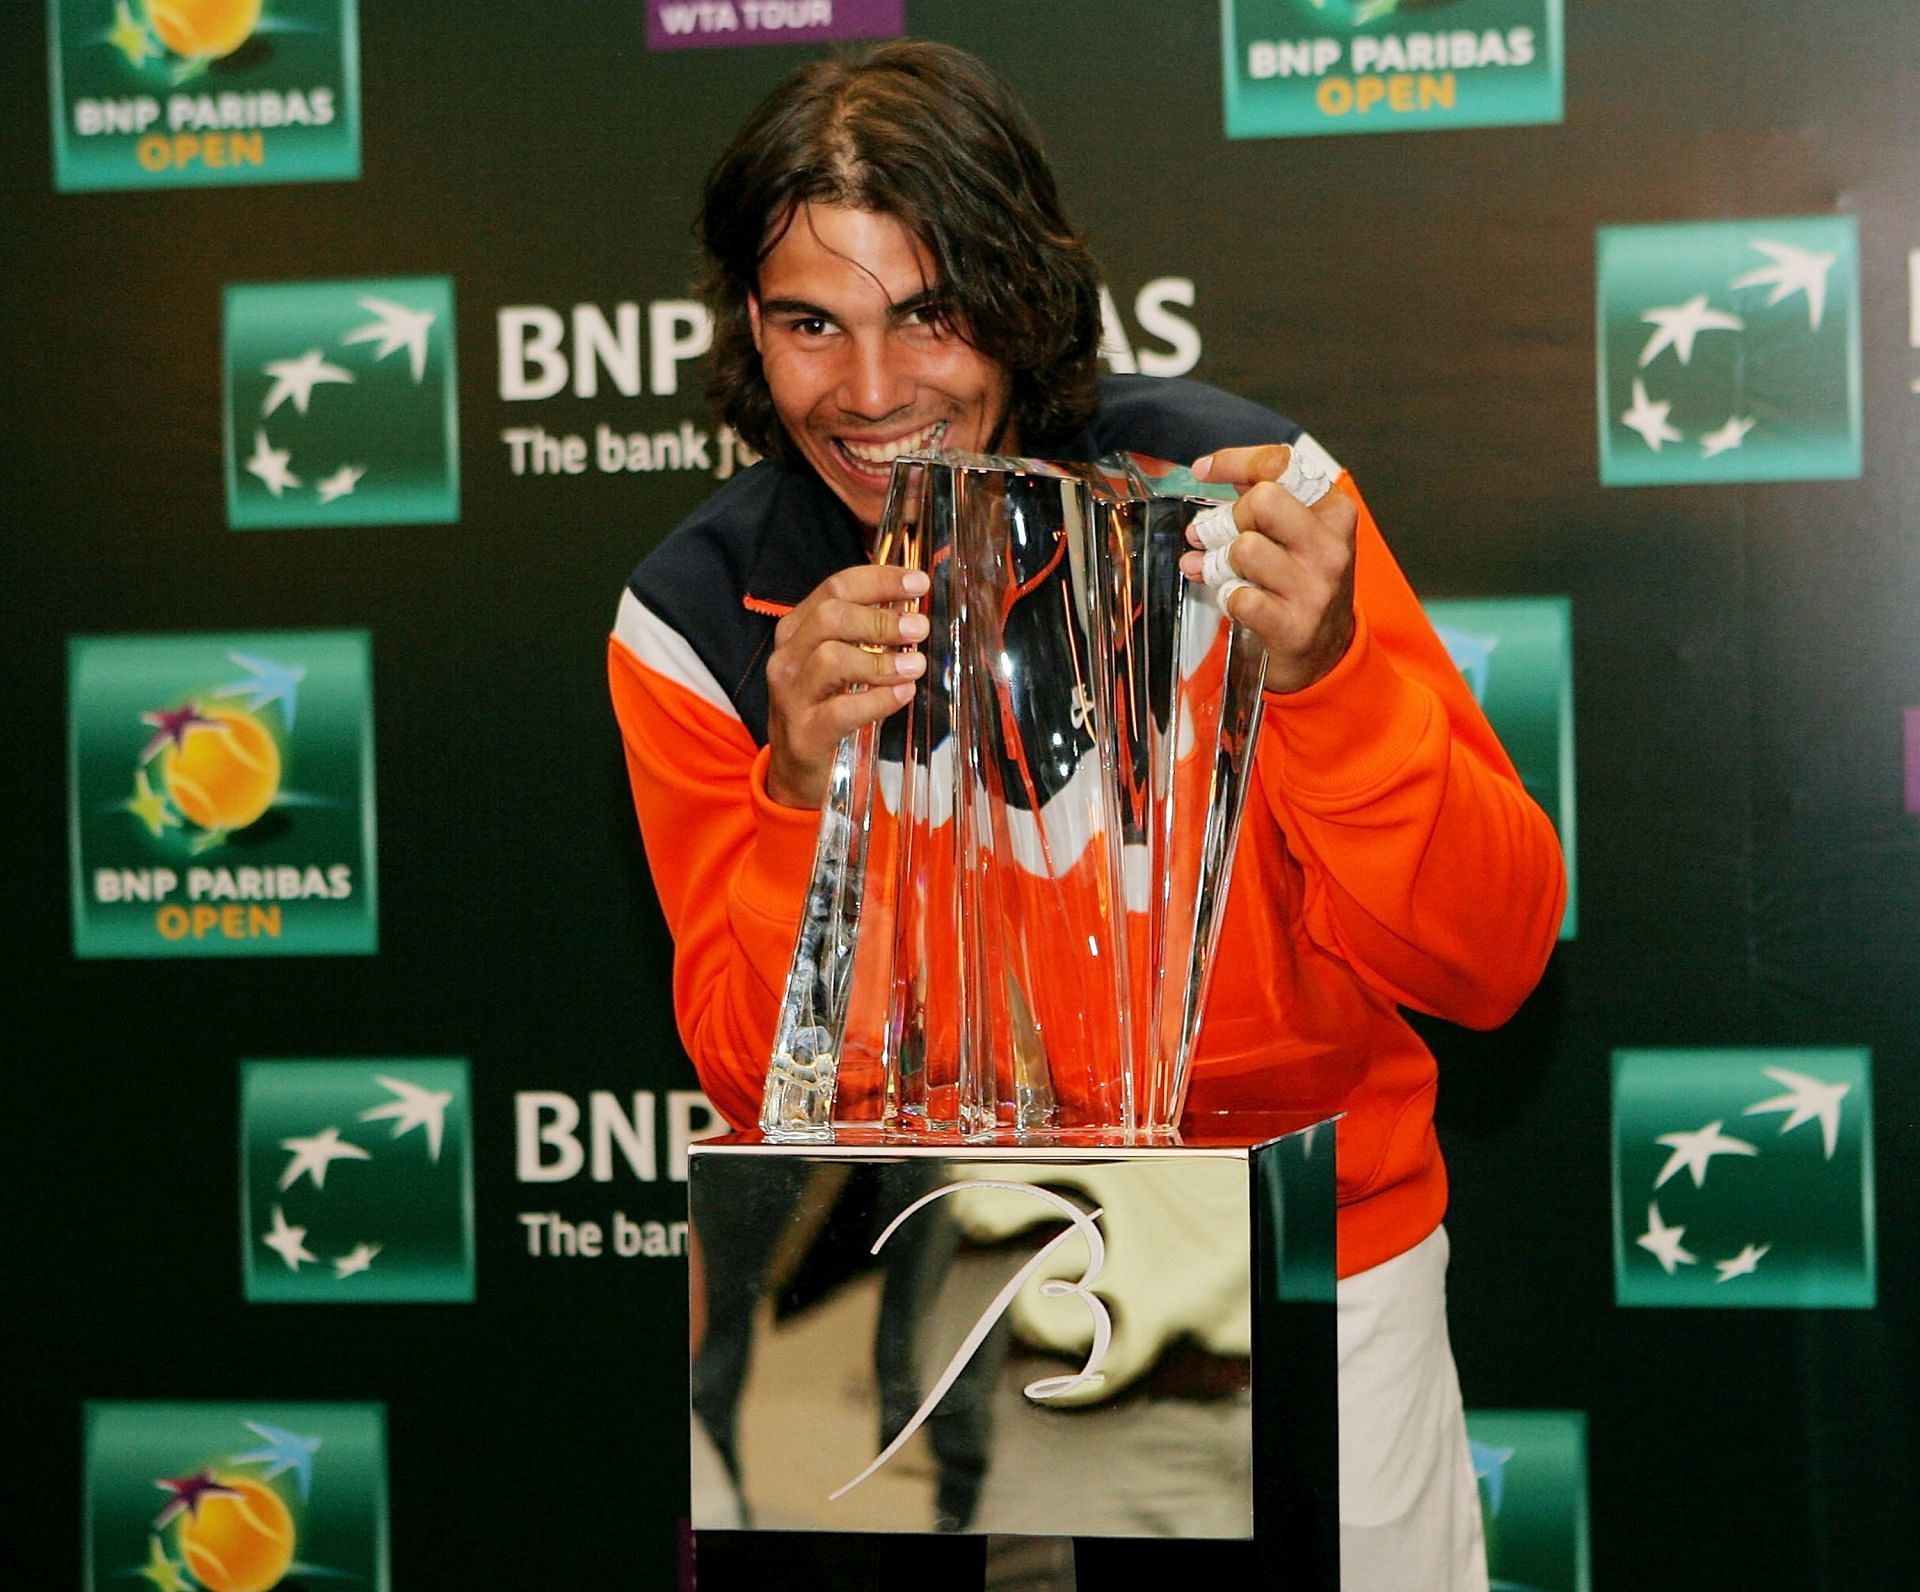 Rafael Nadal won the Indian Wells Masters in 2007, 2009 and 2013